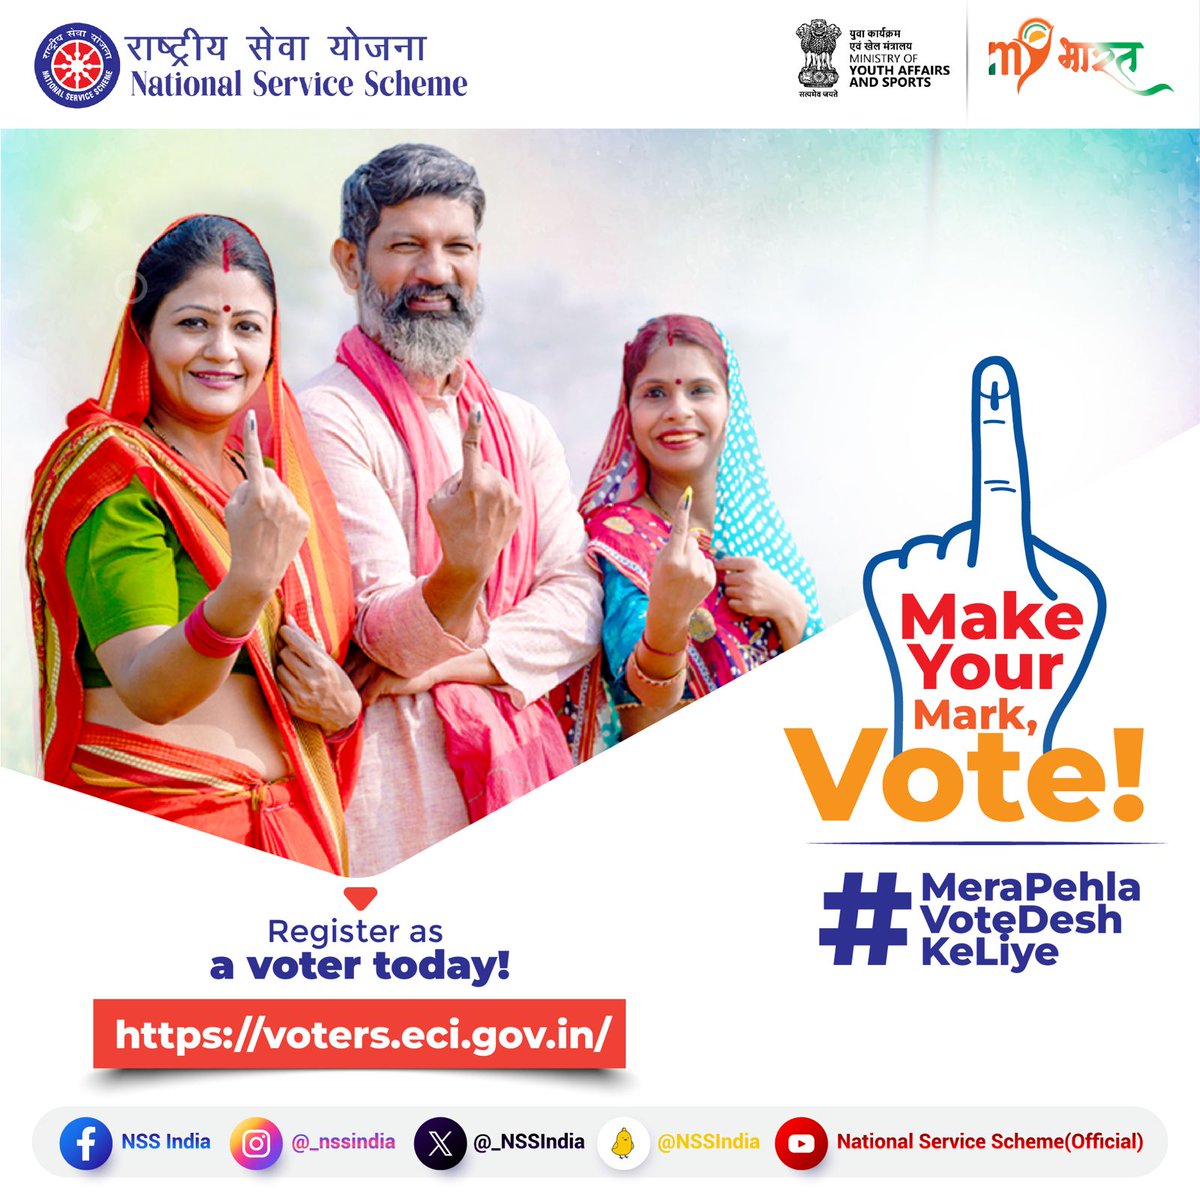 Every vote counts! Make your voice heard by registering as a voter today. #voterawareness #MeraPehlaVoteDeshKeLiye #Vote4Sure